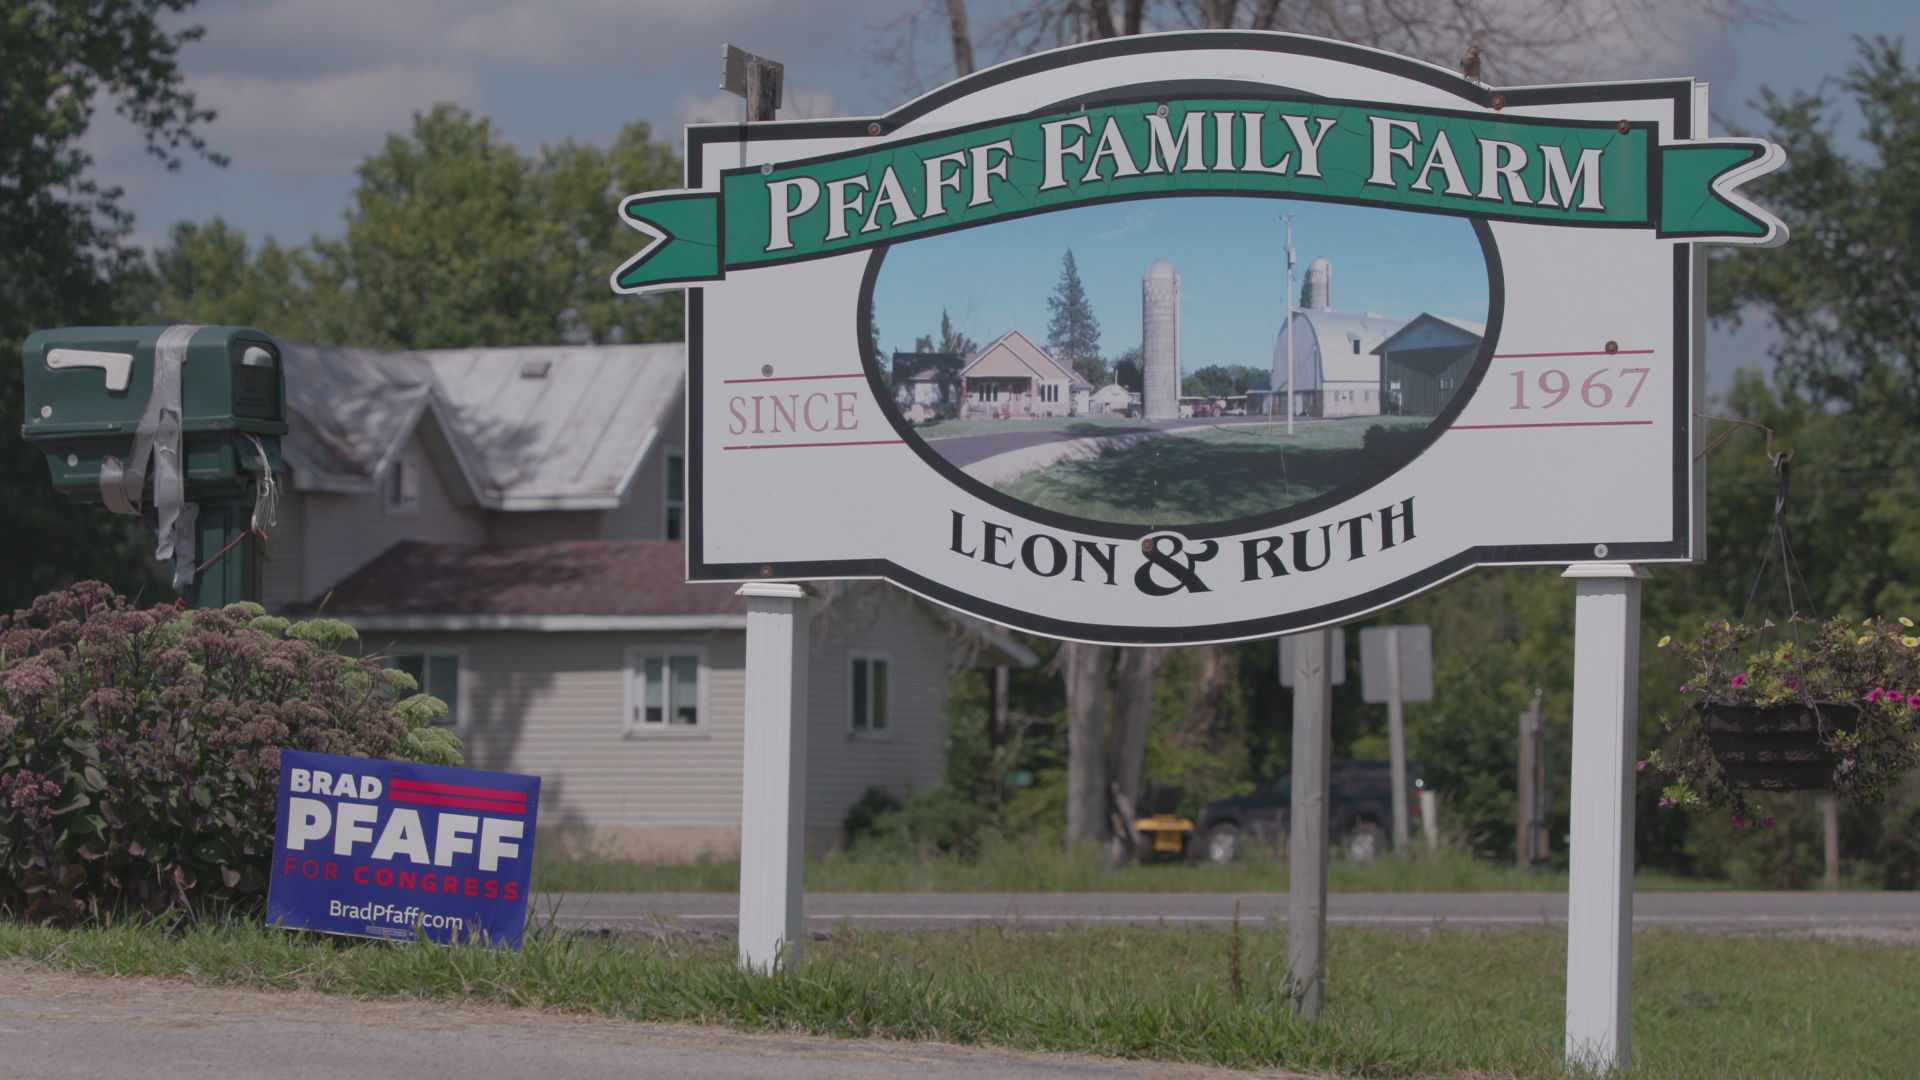 A sign that says "Pfaff Family Farm, since 1967, Leon and Ruth" with a Pfaff for Congress sign beside it. A mailbox and house are in the background.